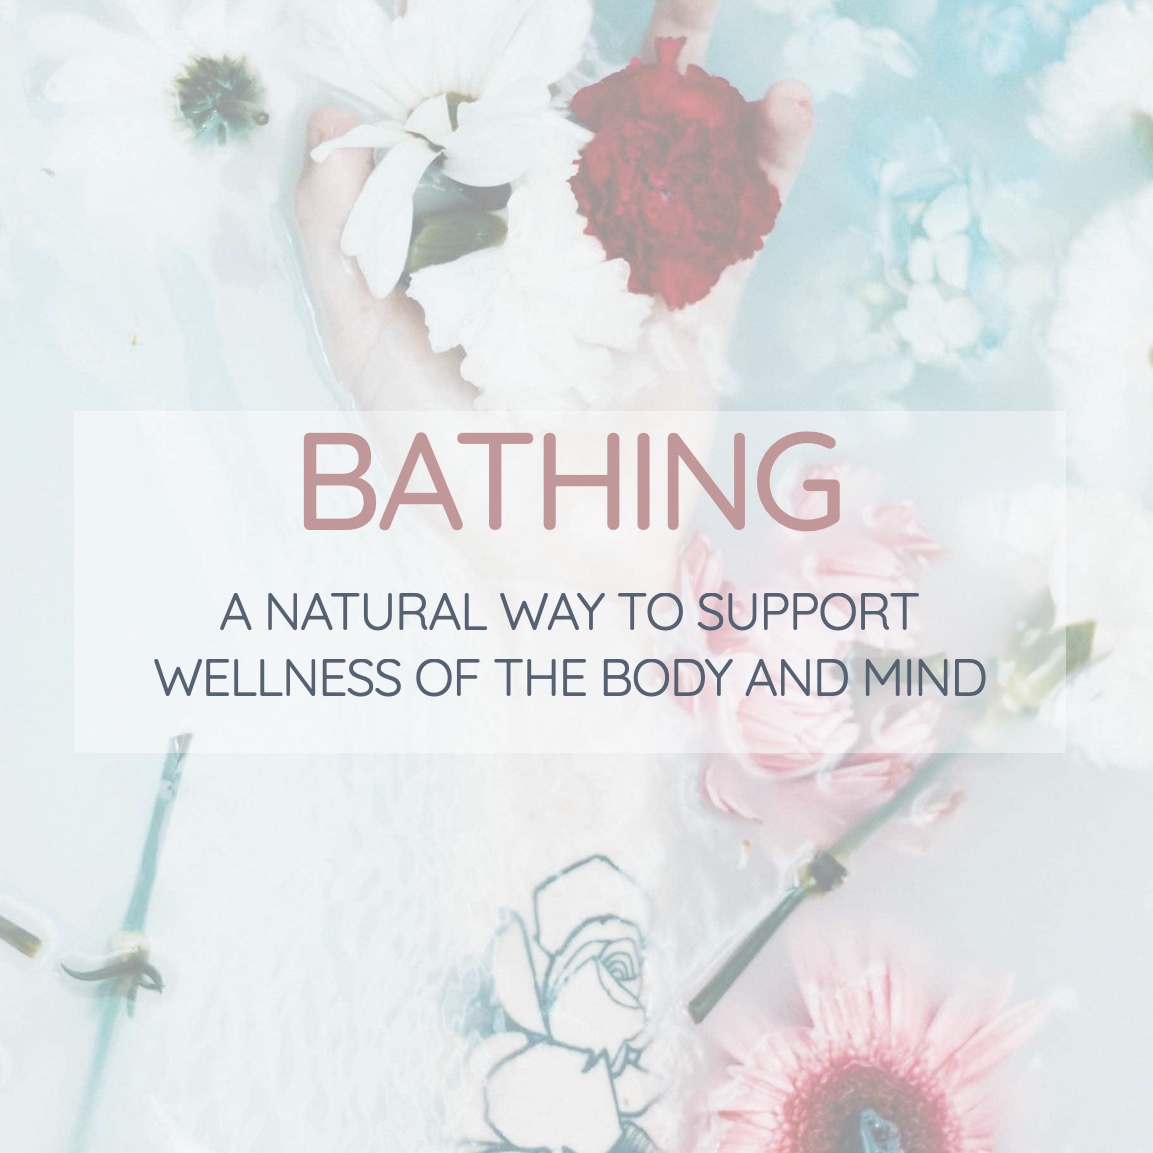 Bathing is a natural way to support mind and body wellness